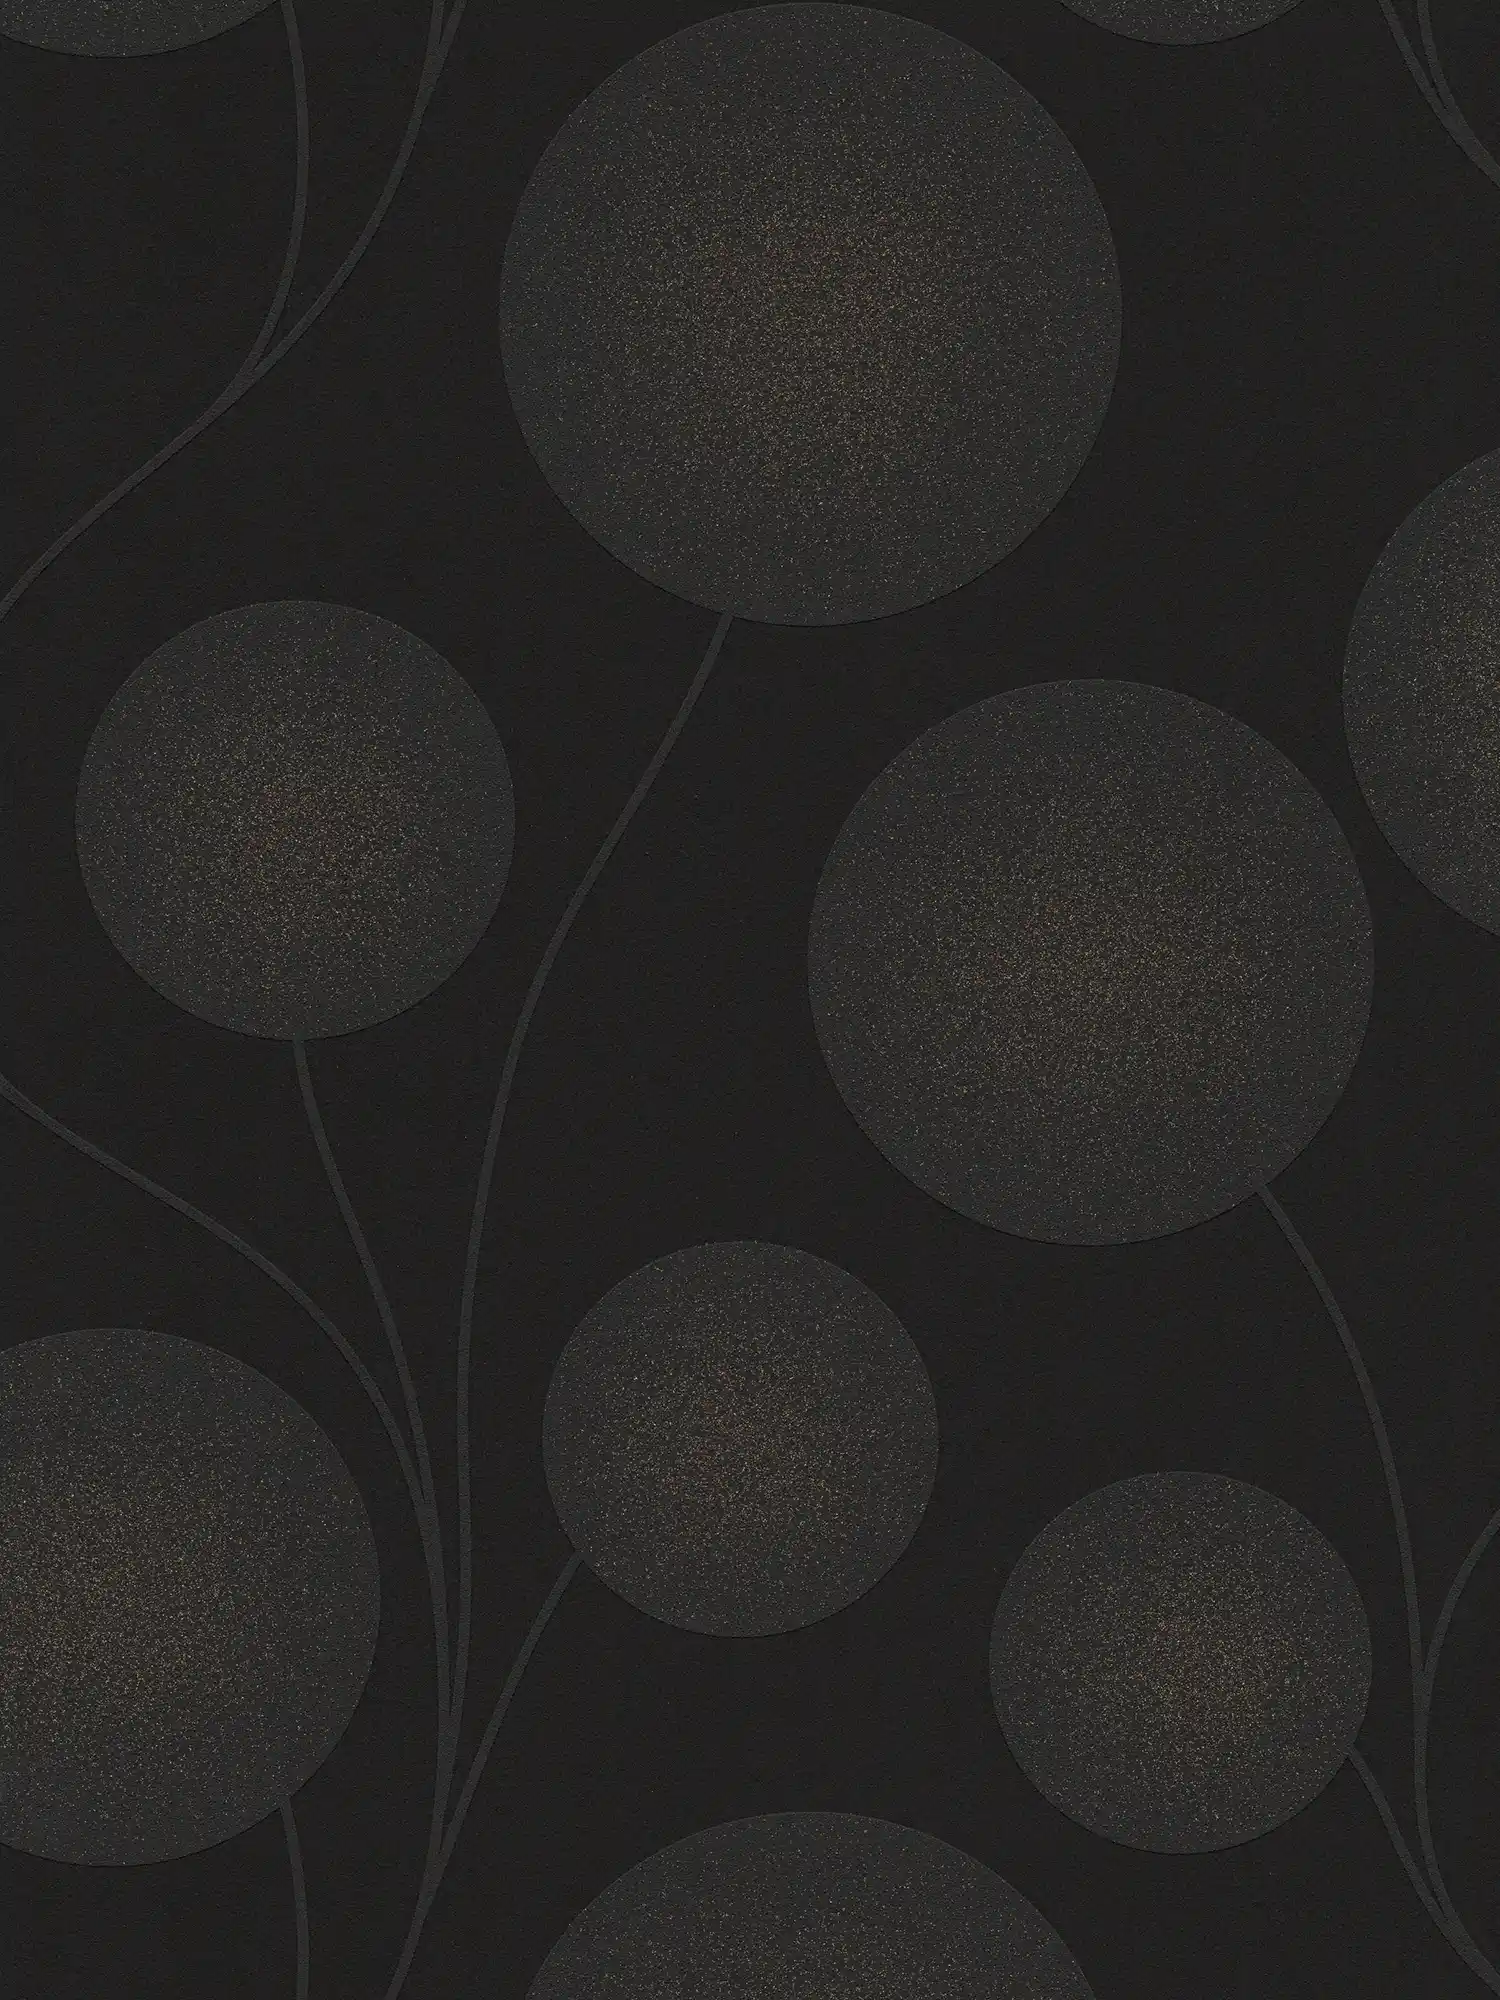 Wallpaper with dots design and texture pattern - black, gold
